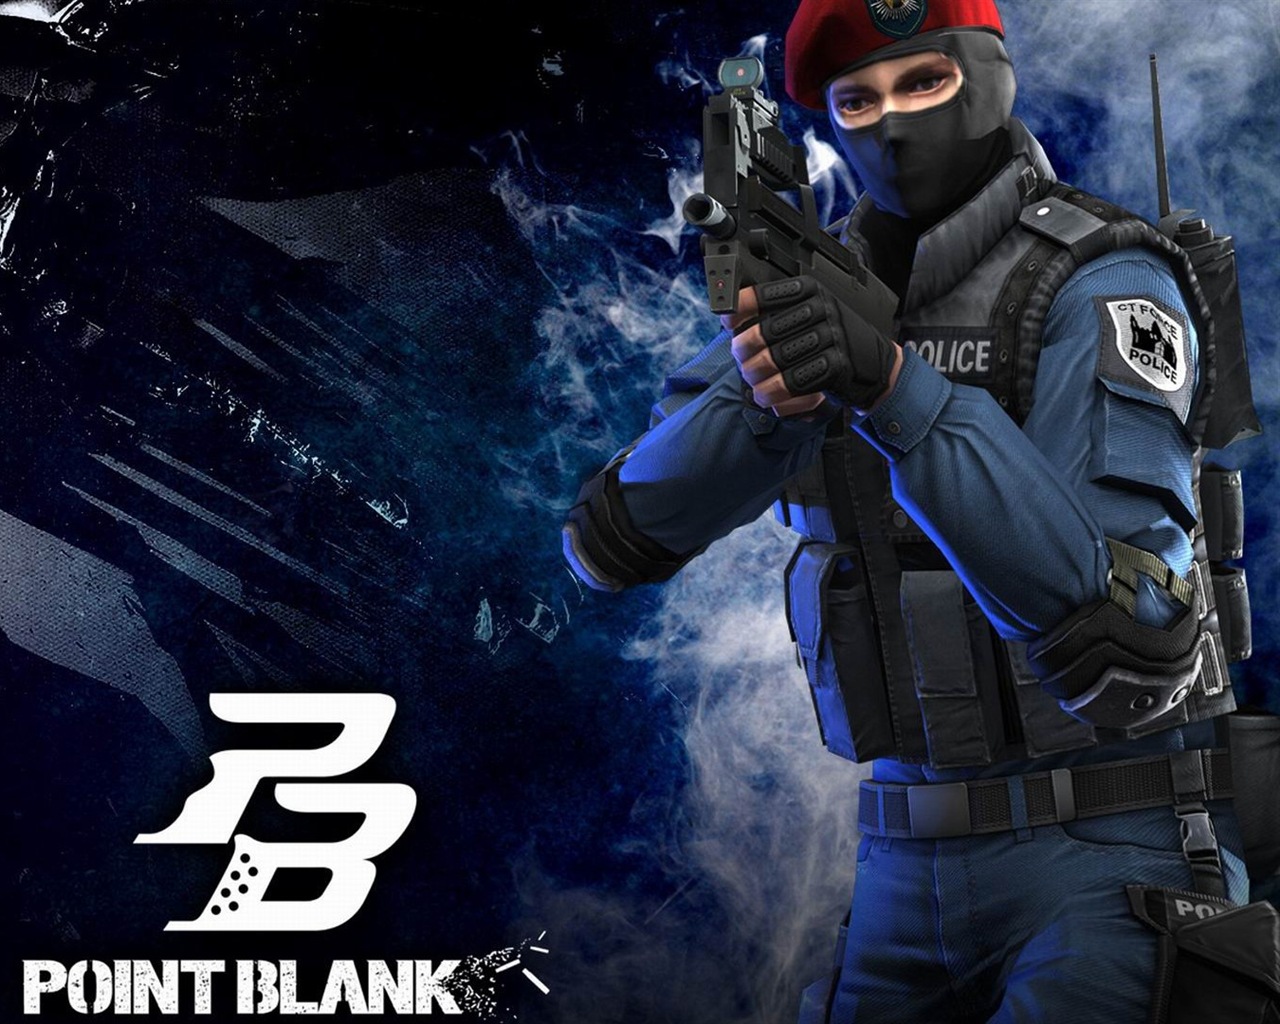 Point Blank HD game wallpapers #3 - 1280x1024